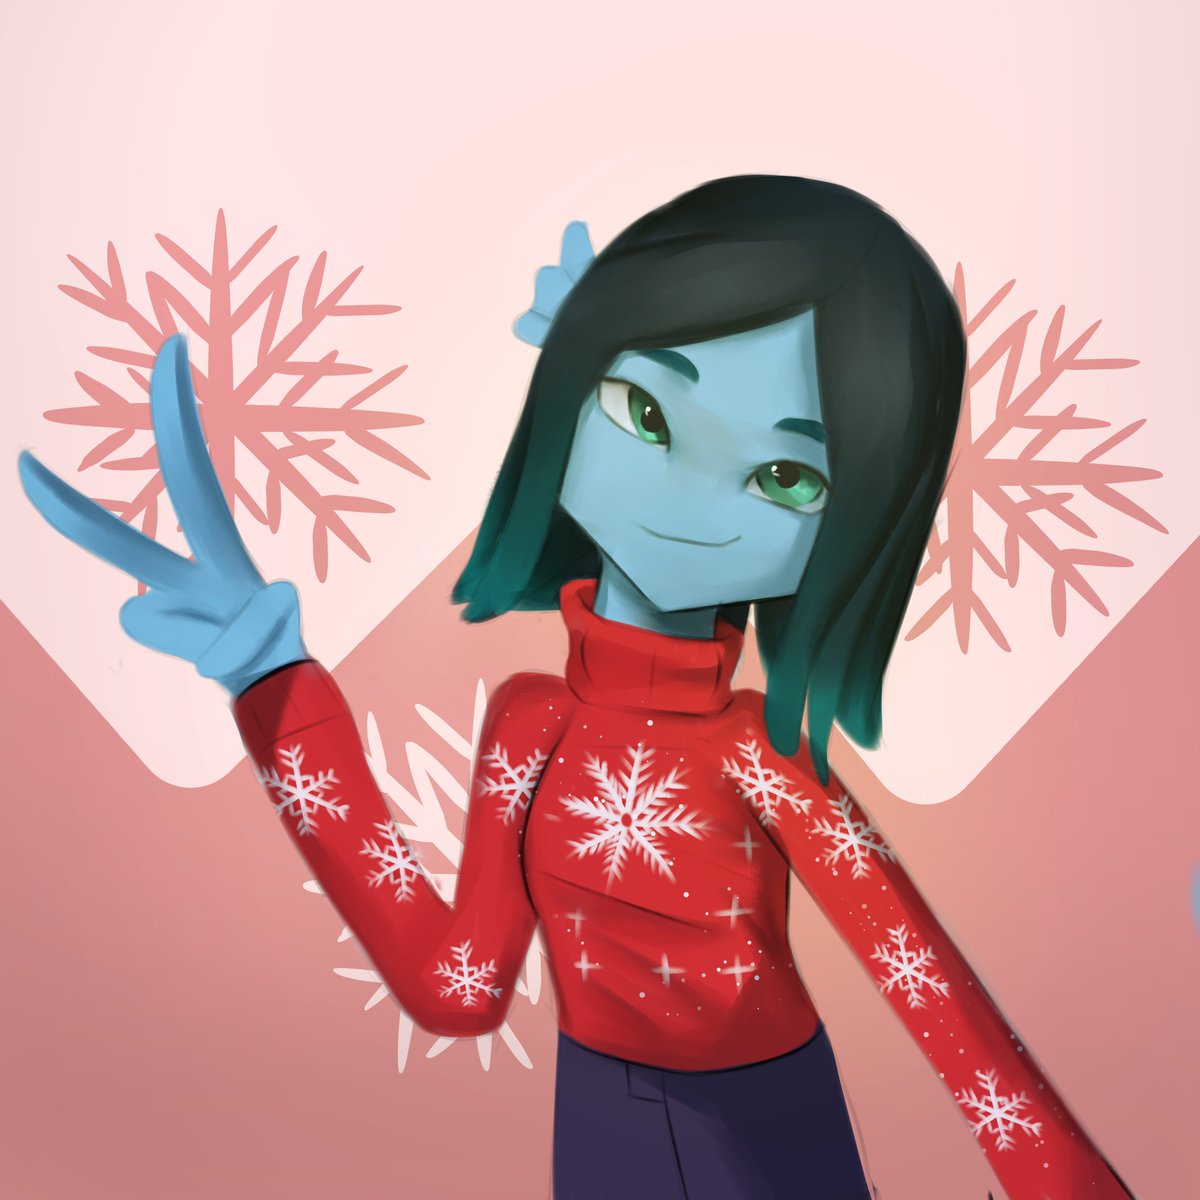 (#digitalart #DigitalArtist #Holidays2023 #Christmas2023 #fanart )

Turns out, i did have one last drawing up my sleeve! I wasn't going to upload this because i thought it wasn't that good but... well, here we are. Have a holly jolly kraken!